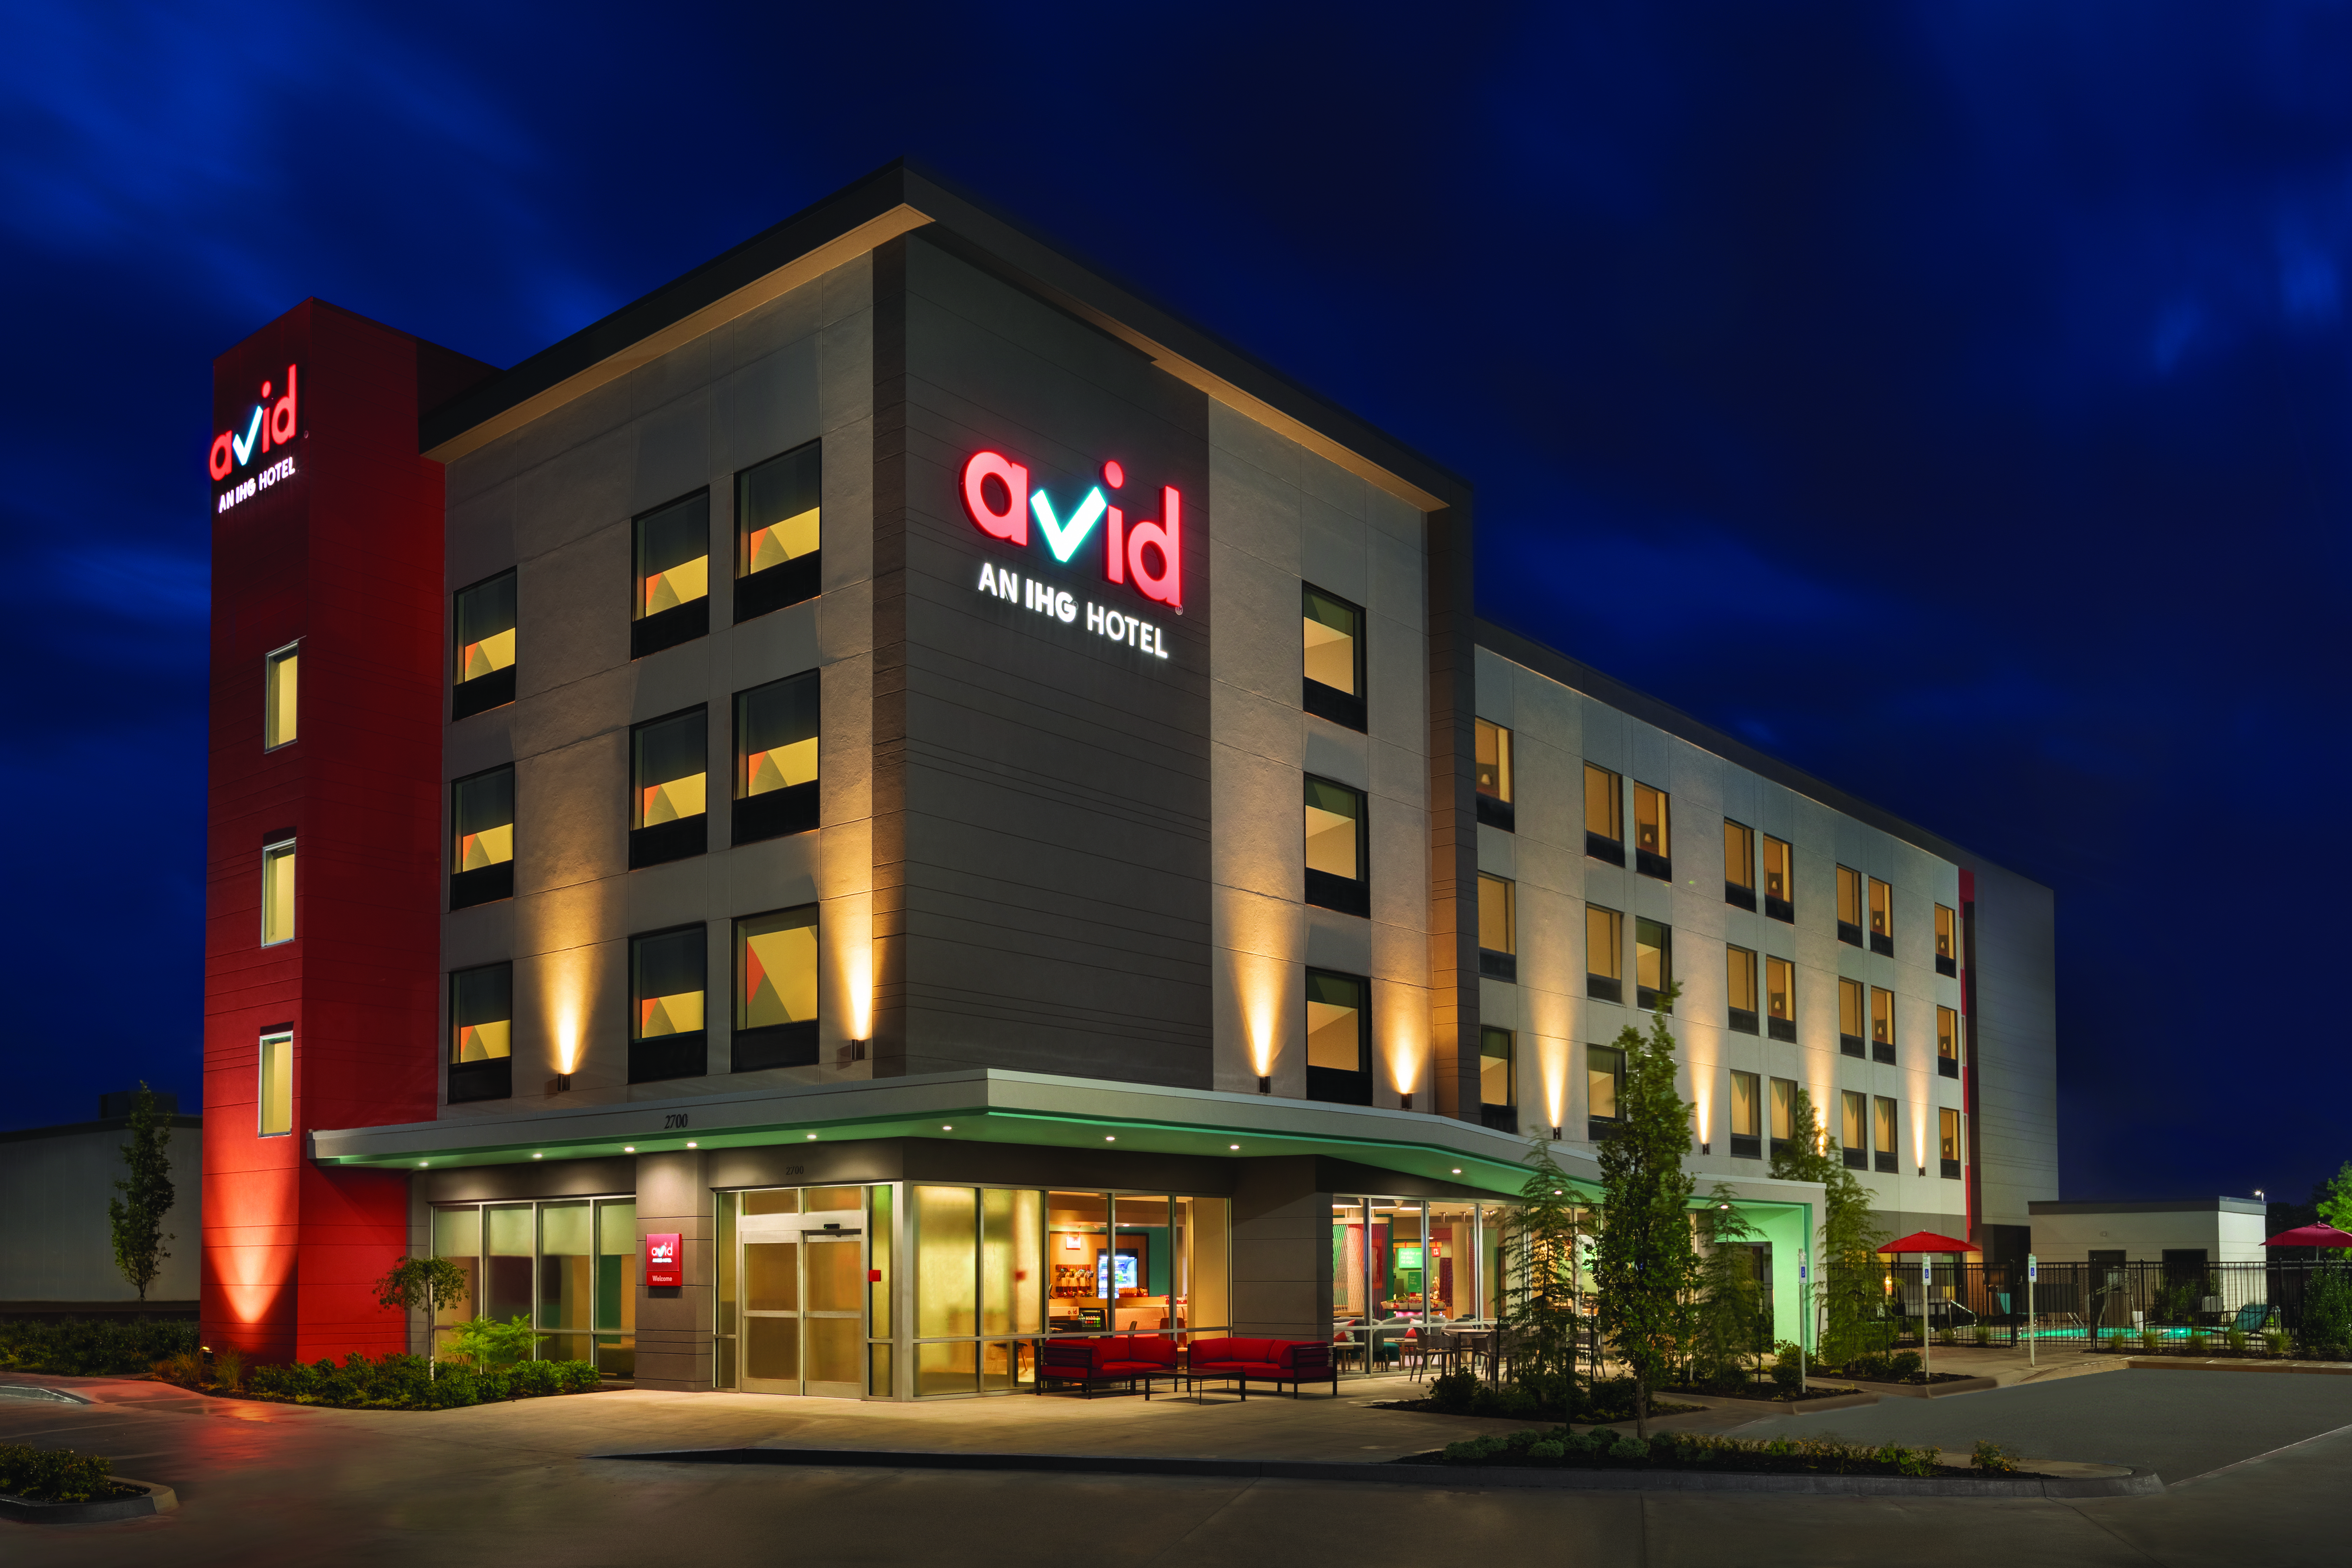 The 87-room Avid Hotel Oklahoma City-Quail Springs opened 199 days after it began development